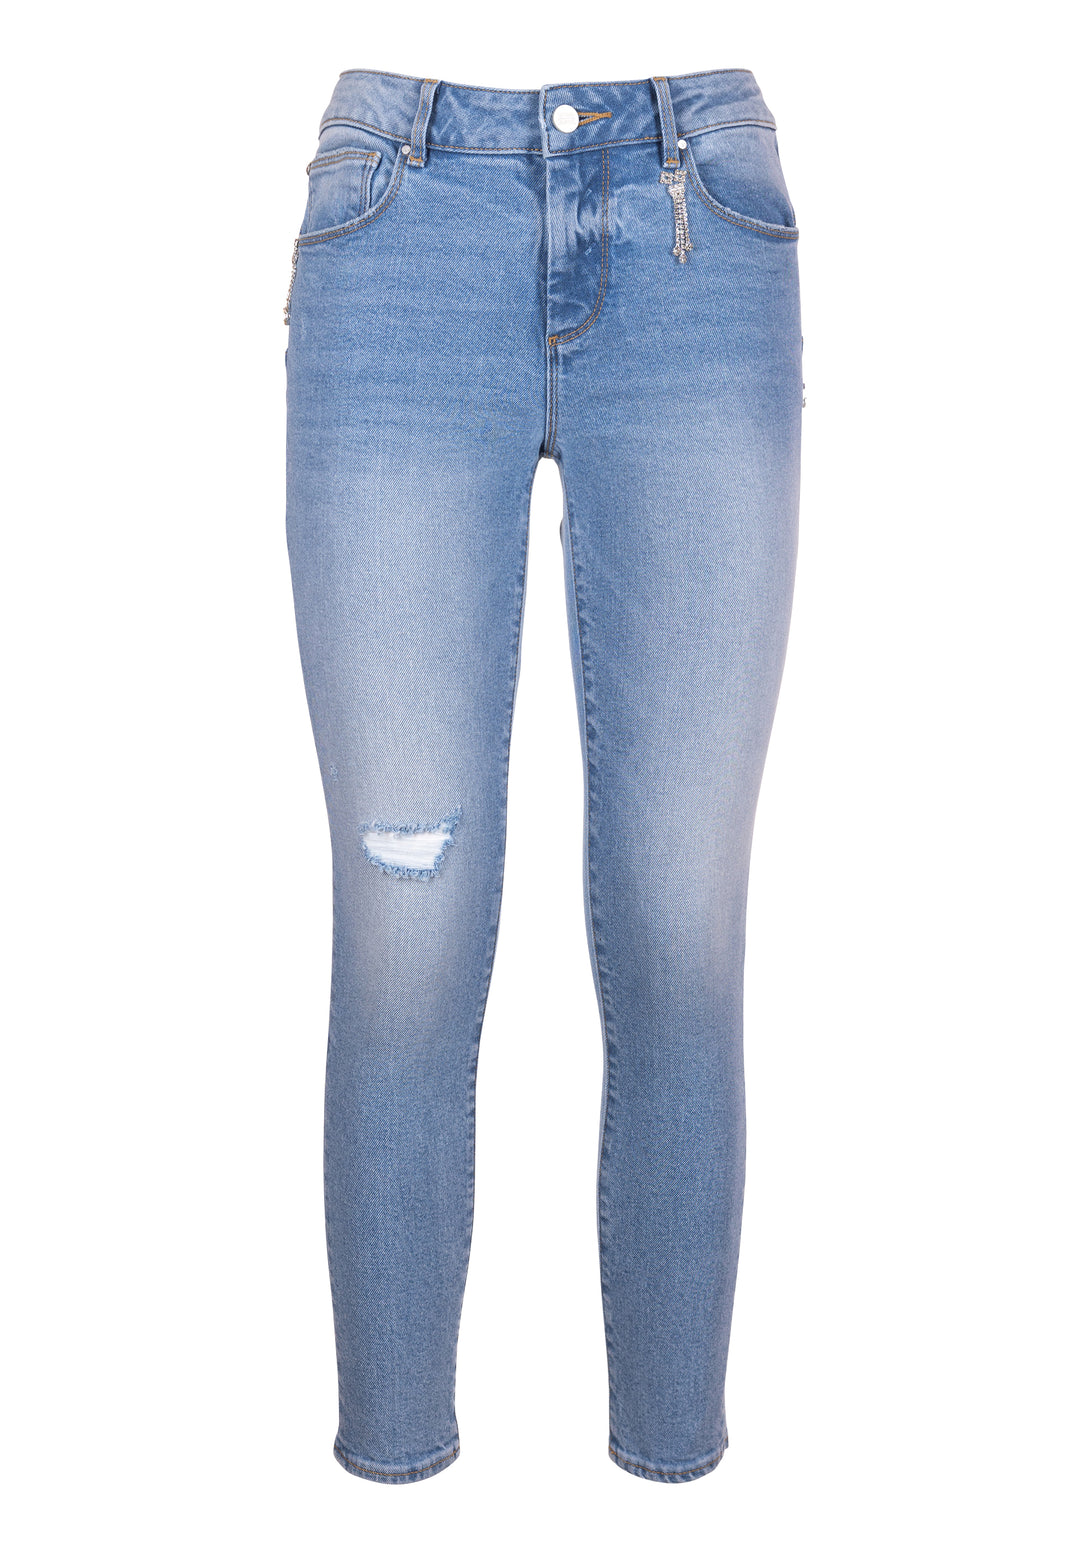 Jeans skinny fit with push-up effect made in denim with vintage wash Fracomina FP23SV8000D45003-275-1